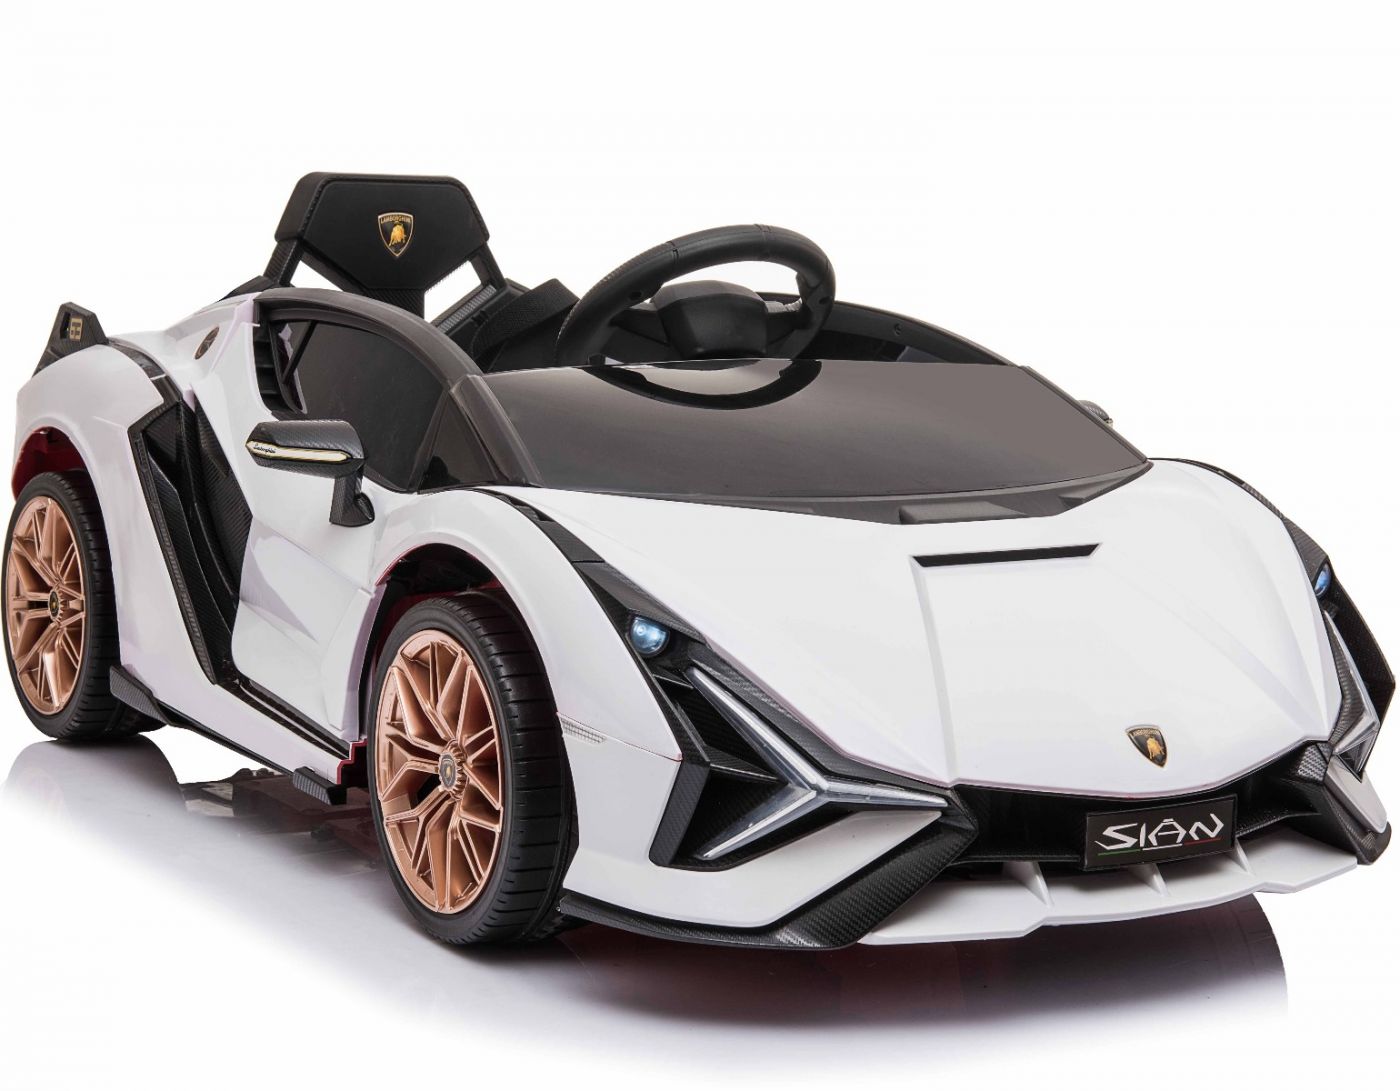 "Black and white Lamborghini Sian design, kid's electric ride-on car with MP4 screen, parental control feature, and 12V power system."